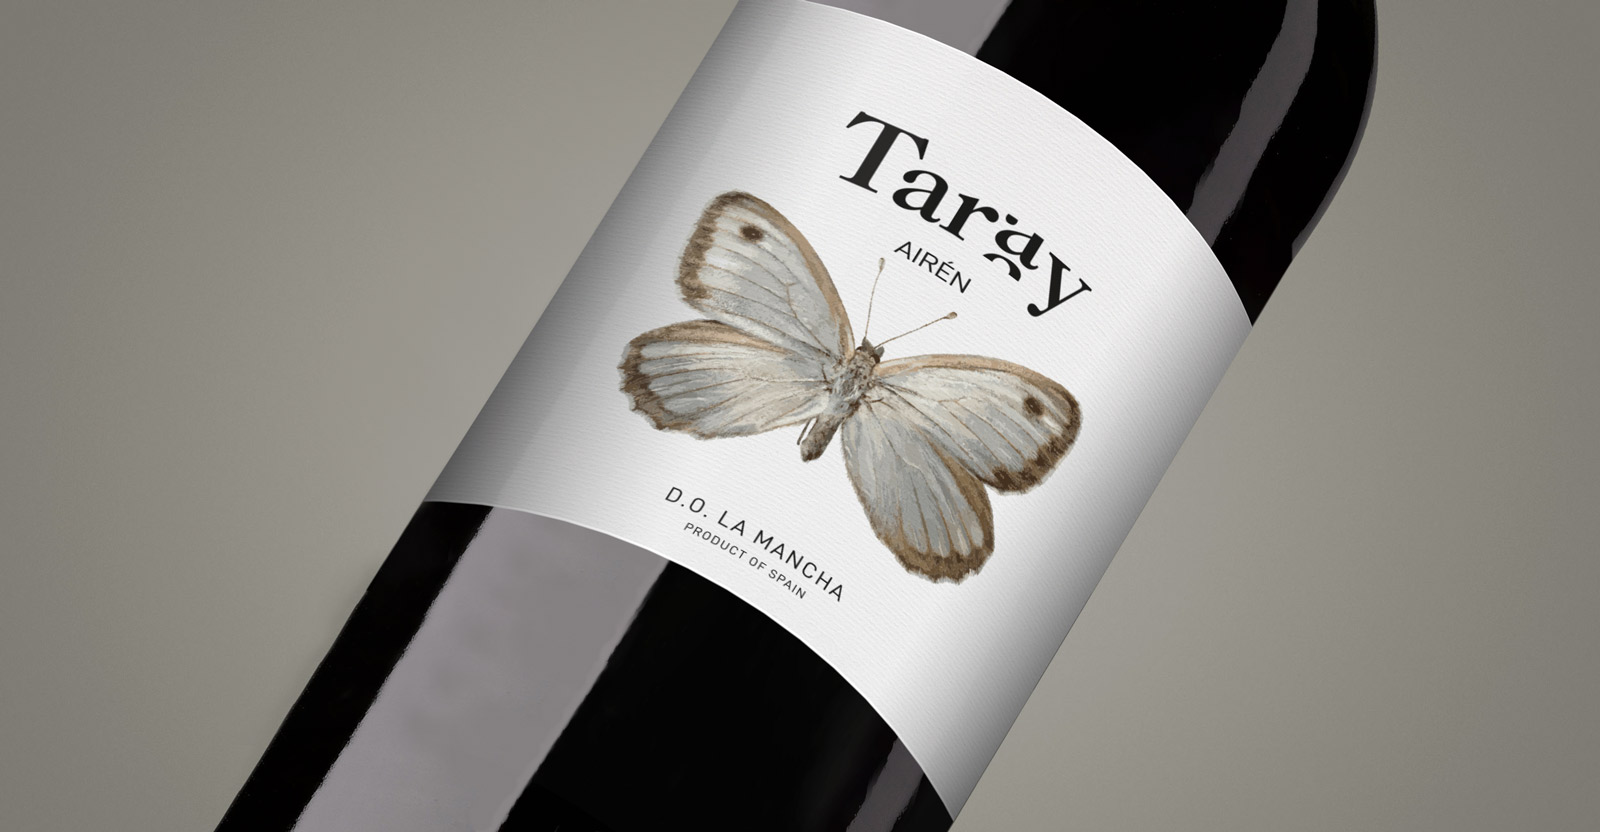 Graphic and creative design of wine labels and packaging for TARAY WINERY